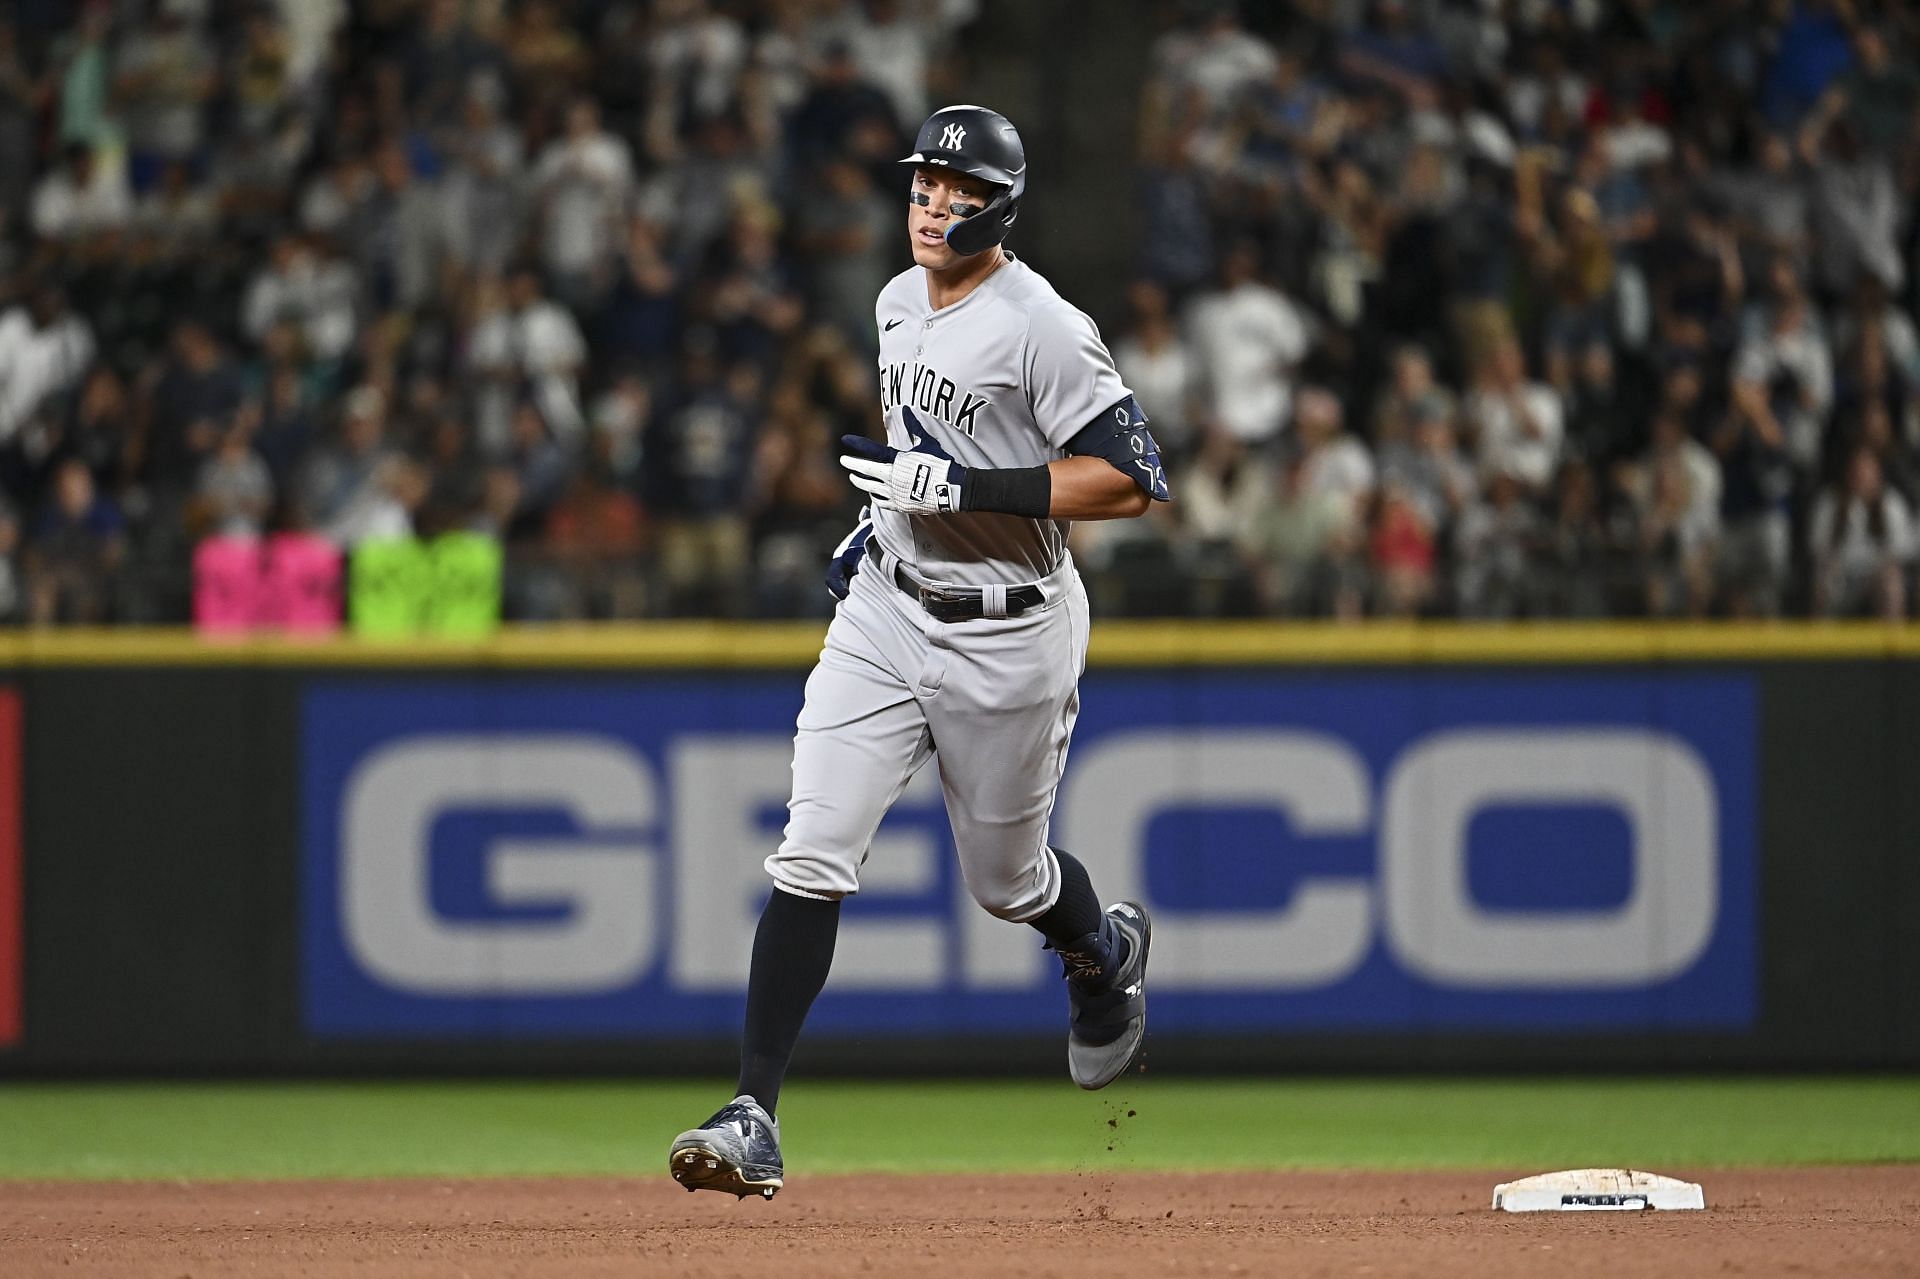 Aaron Judge rounds the bases after hitting his 44th home run during a New York Yankees v Seattle Mariners game on August 8.